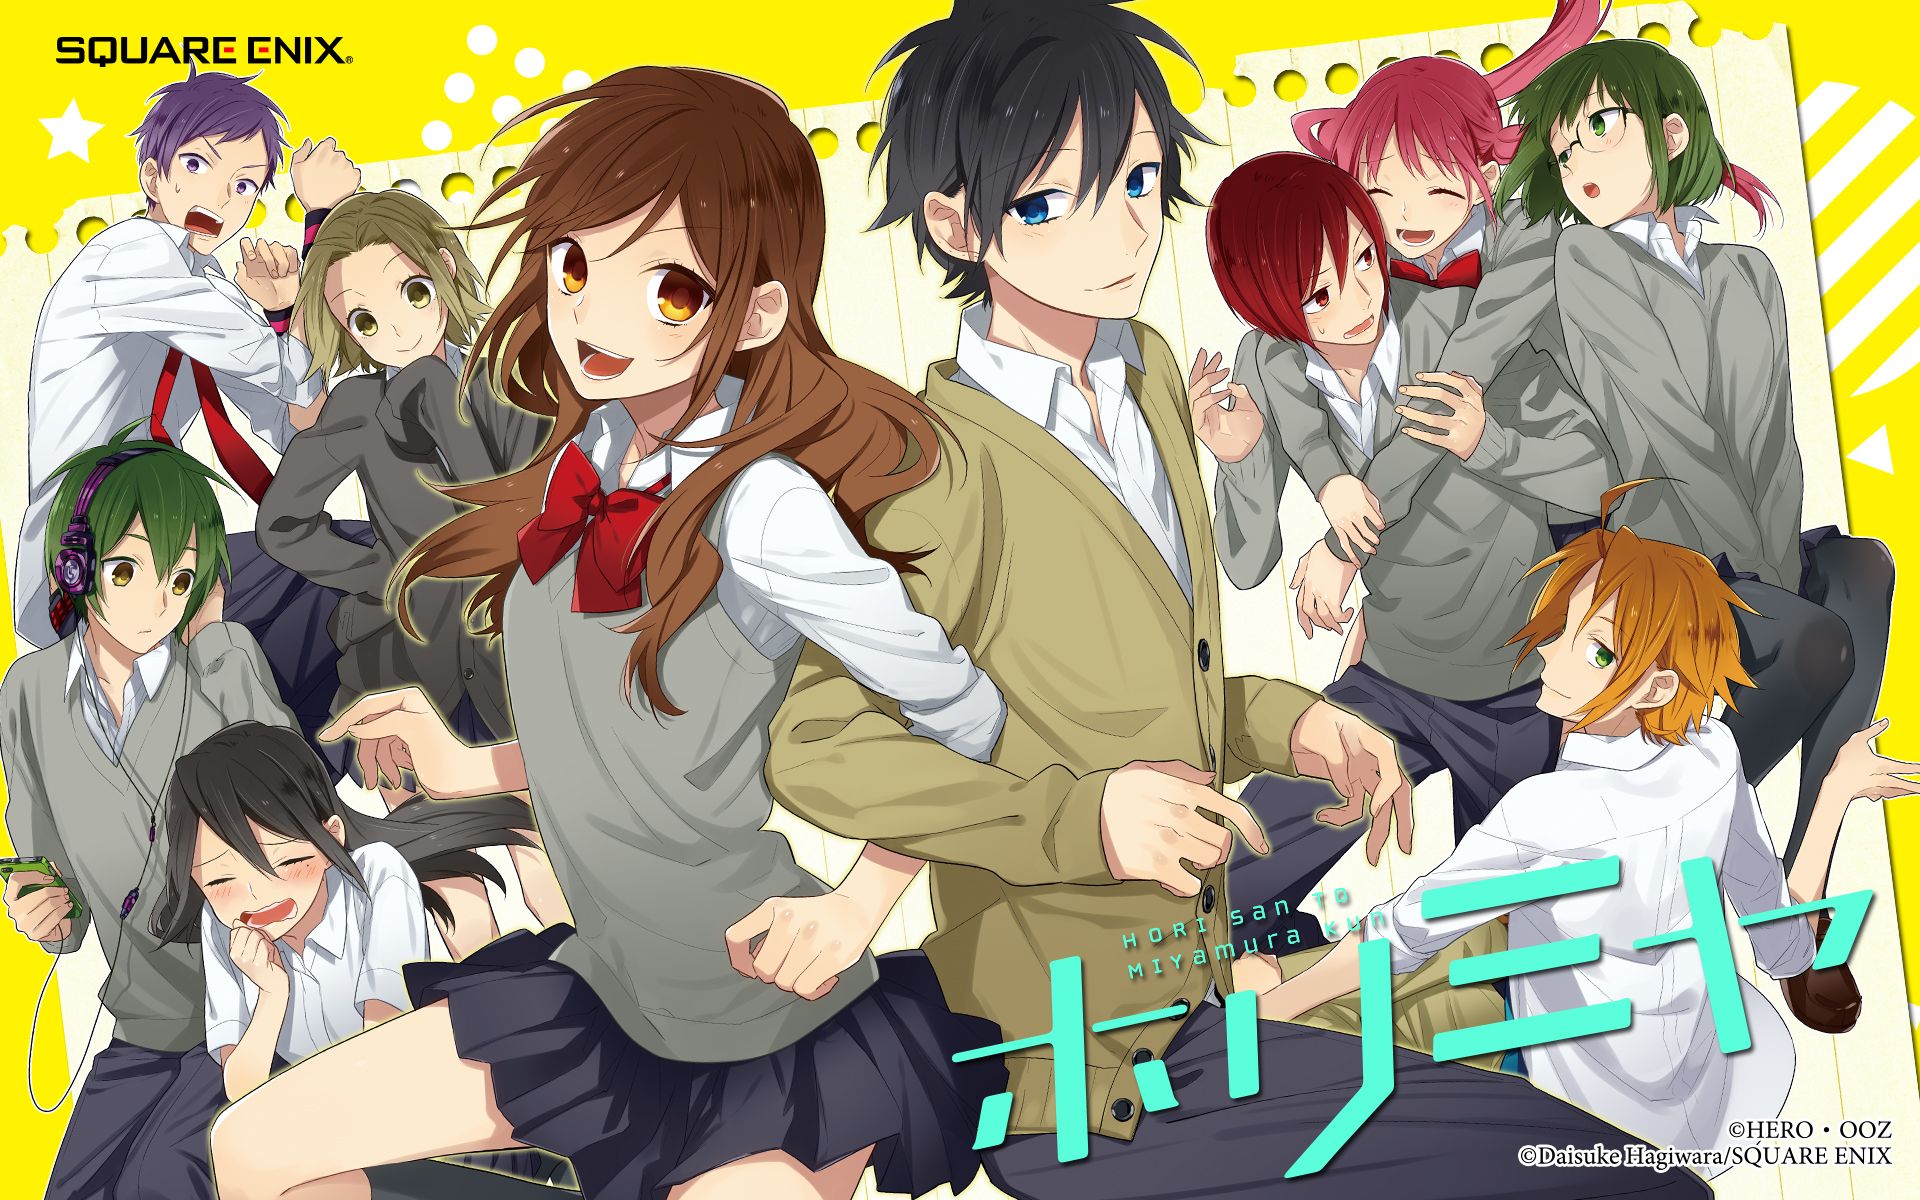 Horimiya: The Missing Pieces Episode 1 Story Review